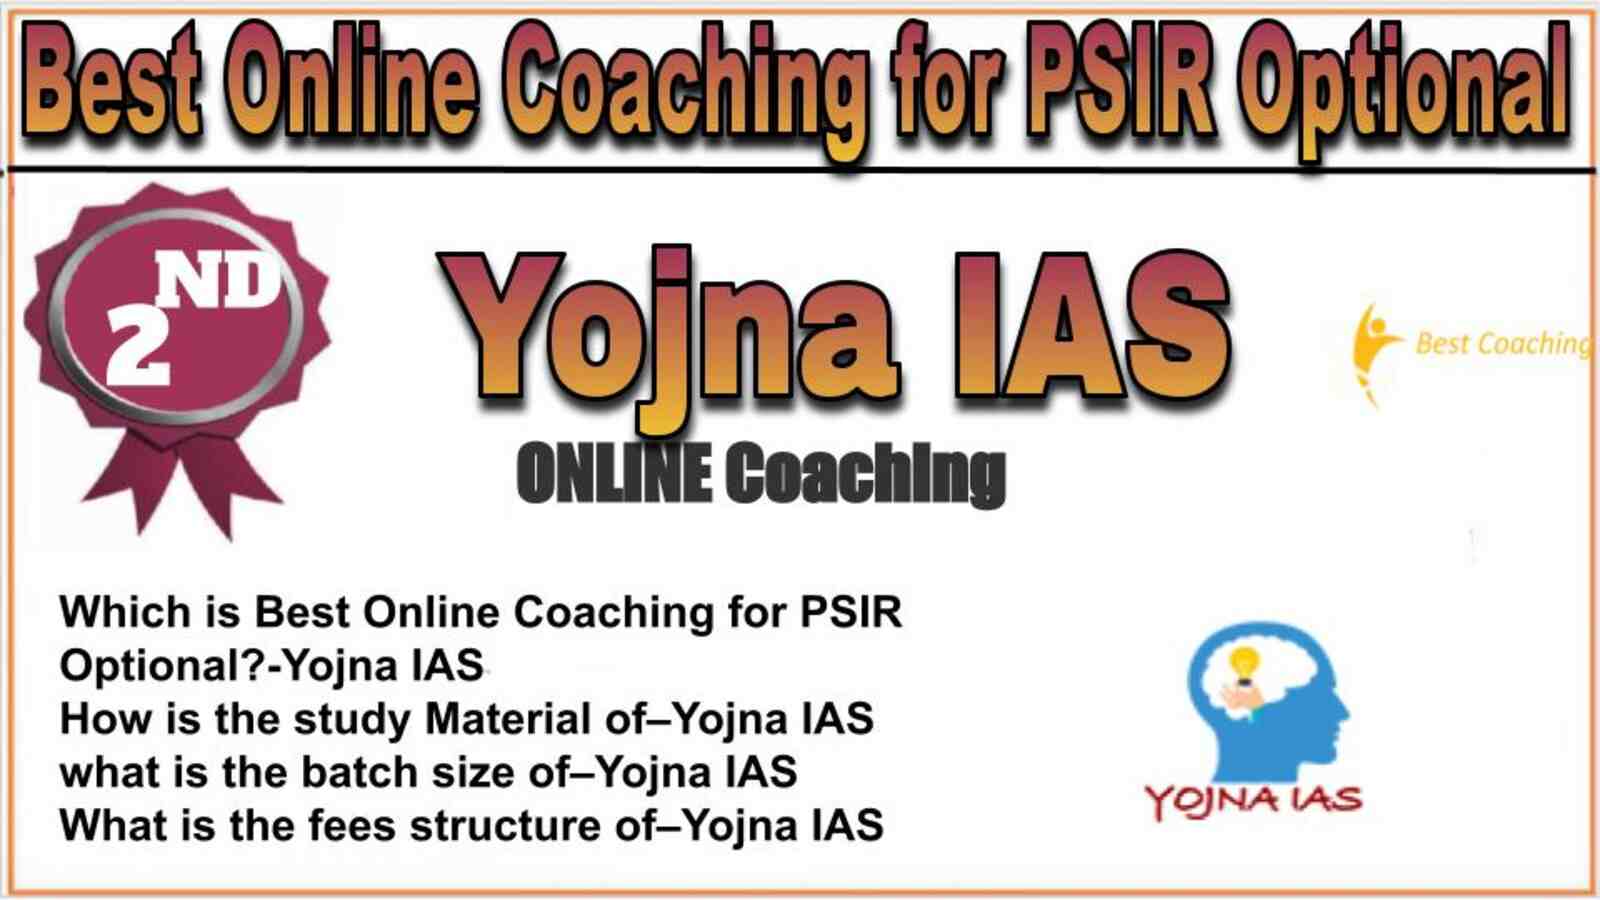 Rank 2 best online coaching for PSIR Optional